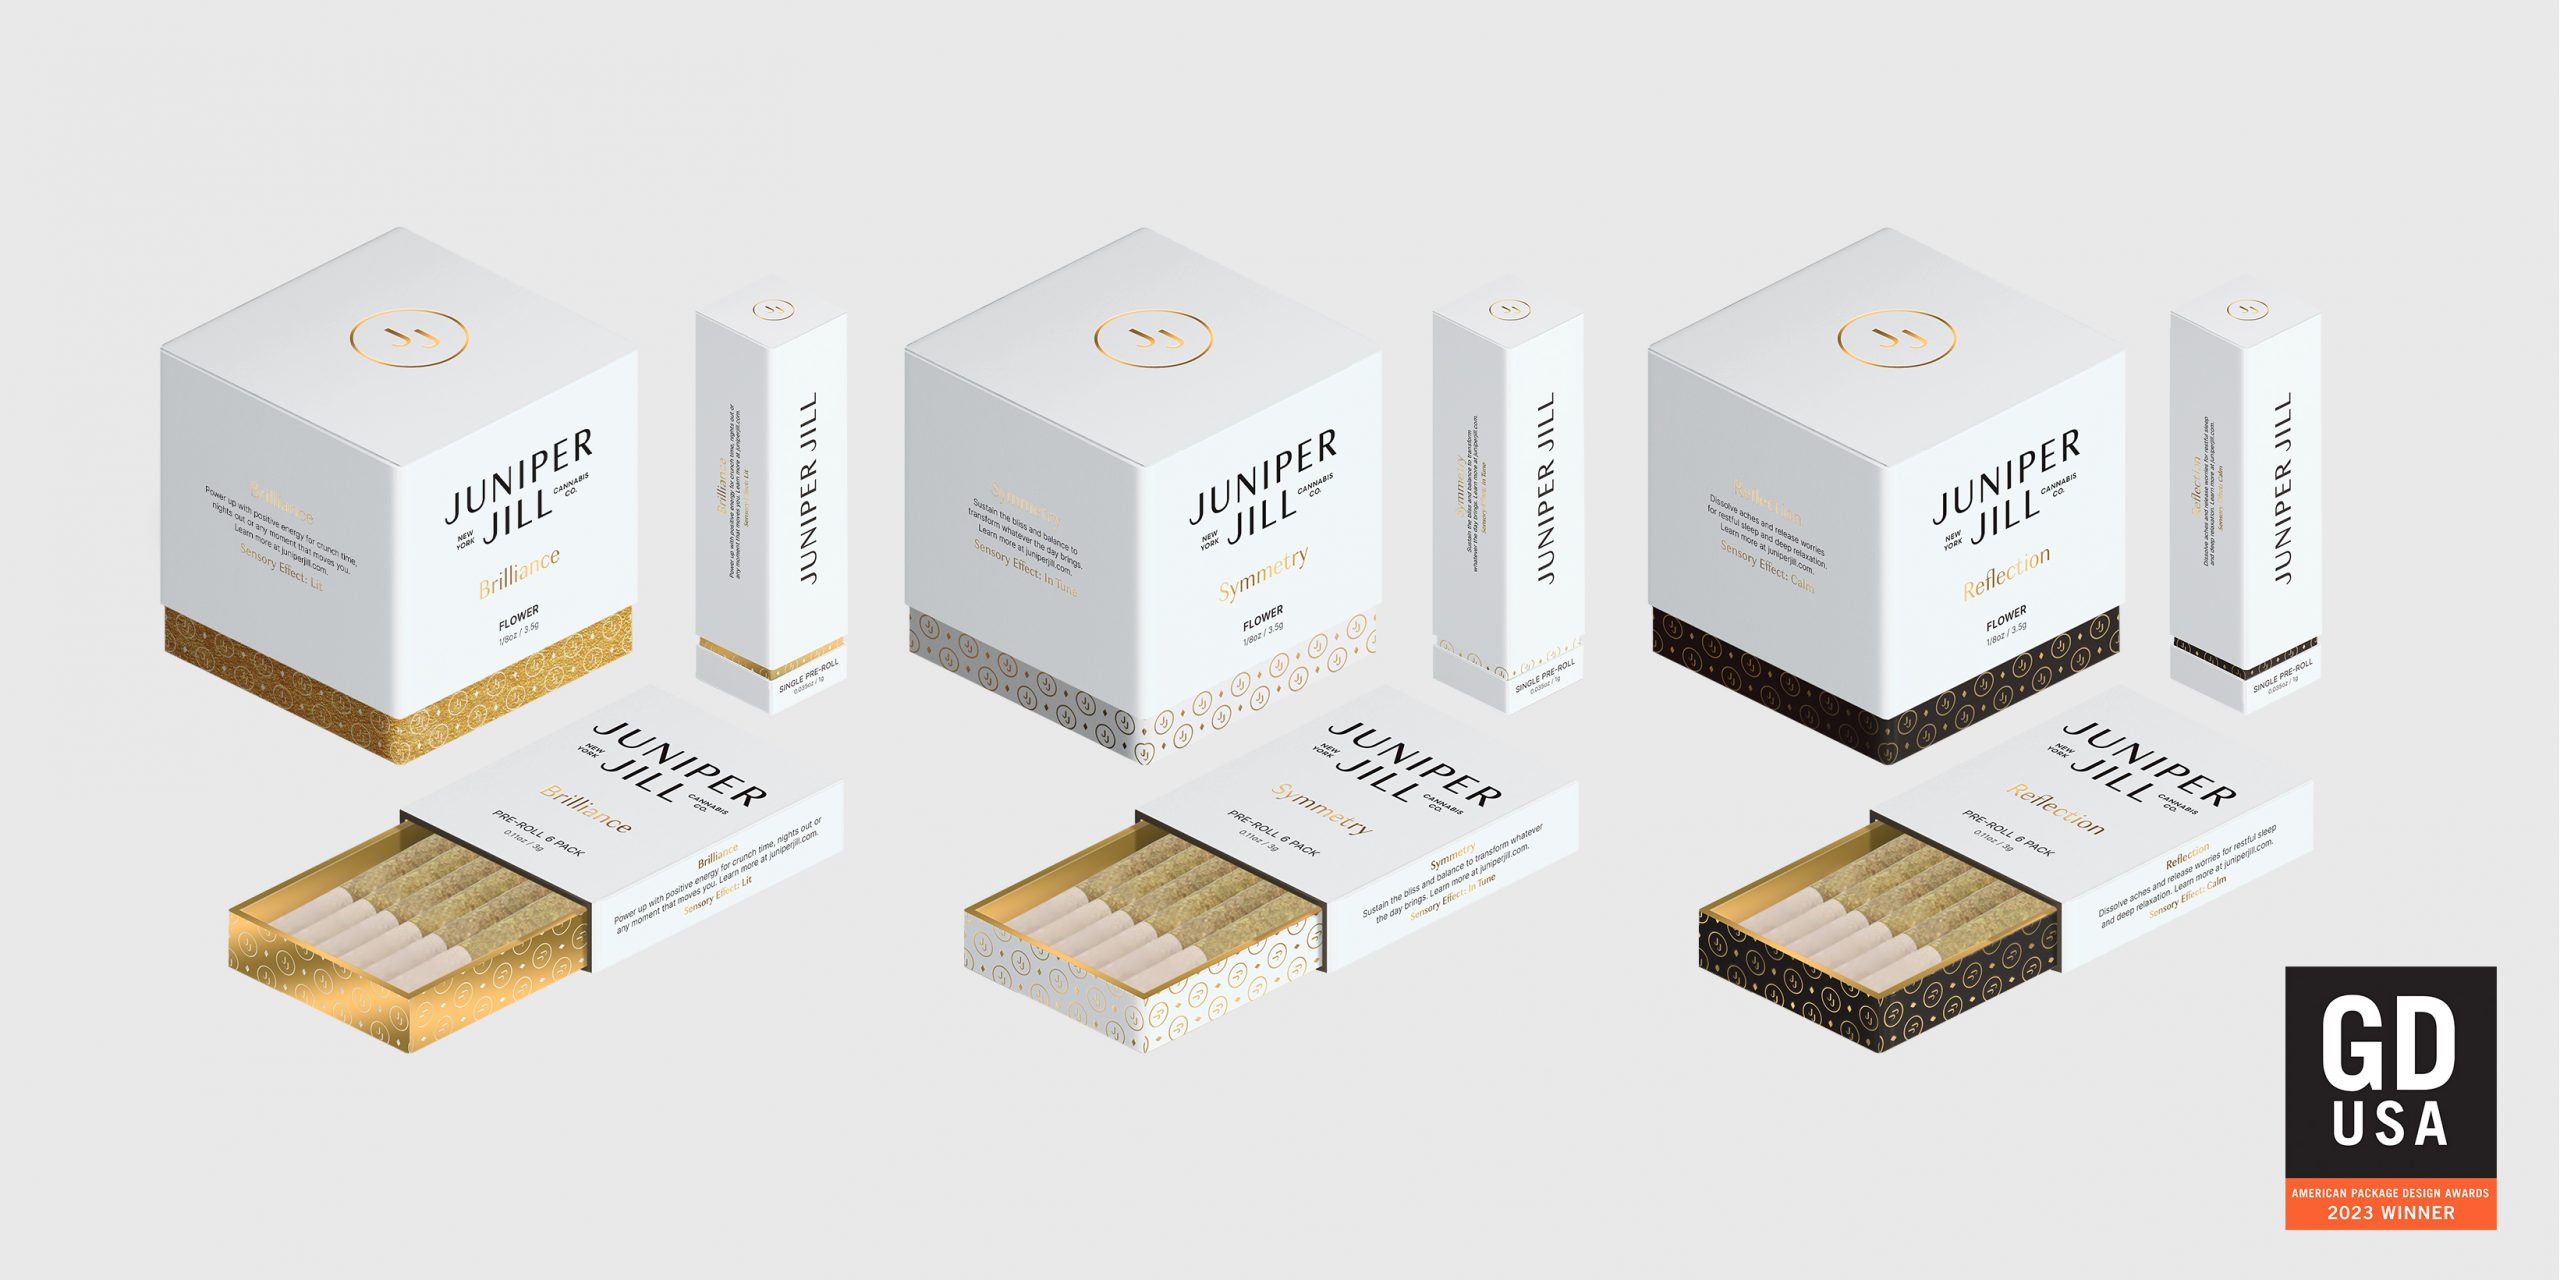 Mockup of white boxes with gold foil and black ink for Juniper Jill's Cannabis product packaging